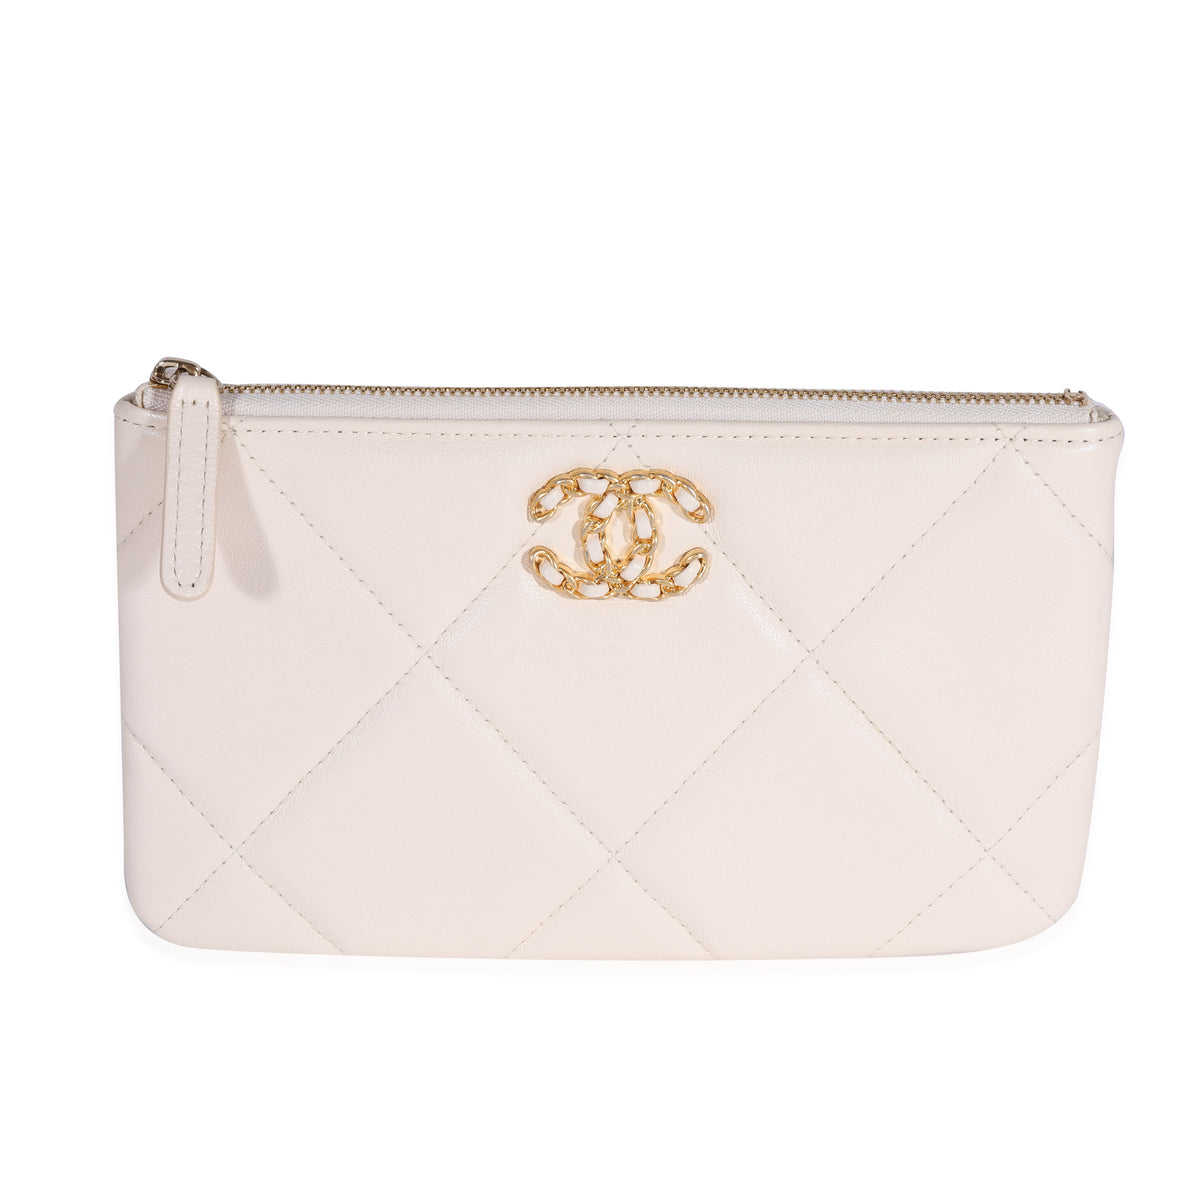 Chanel White Quilted Lambskin Chanel 19 Pouch